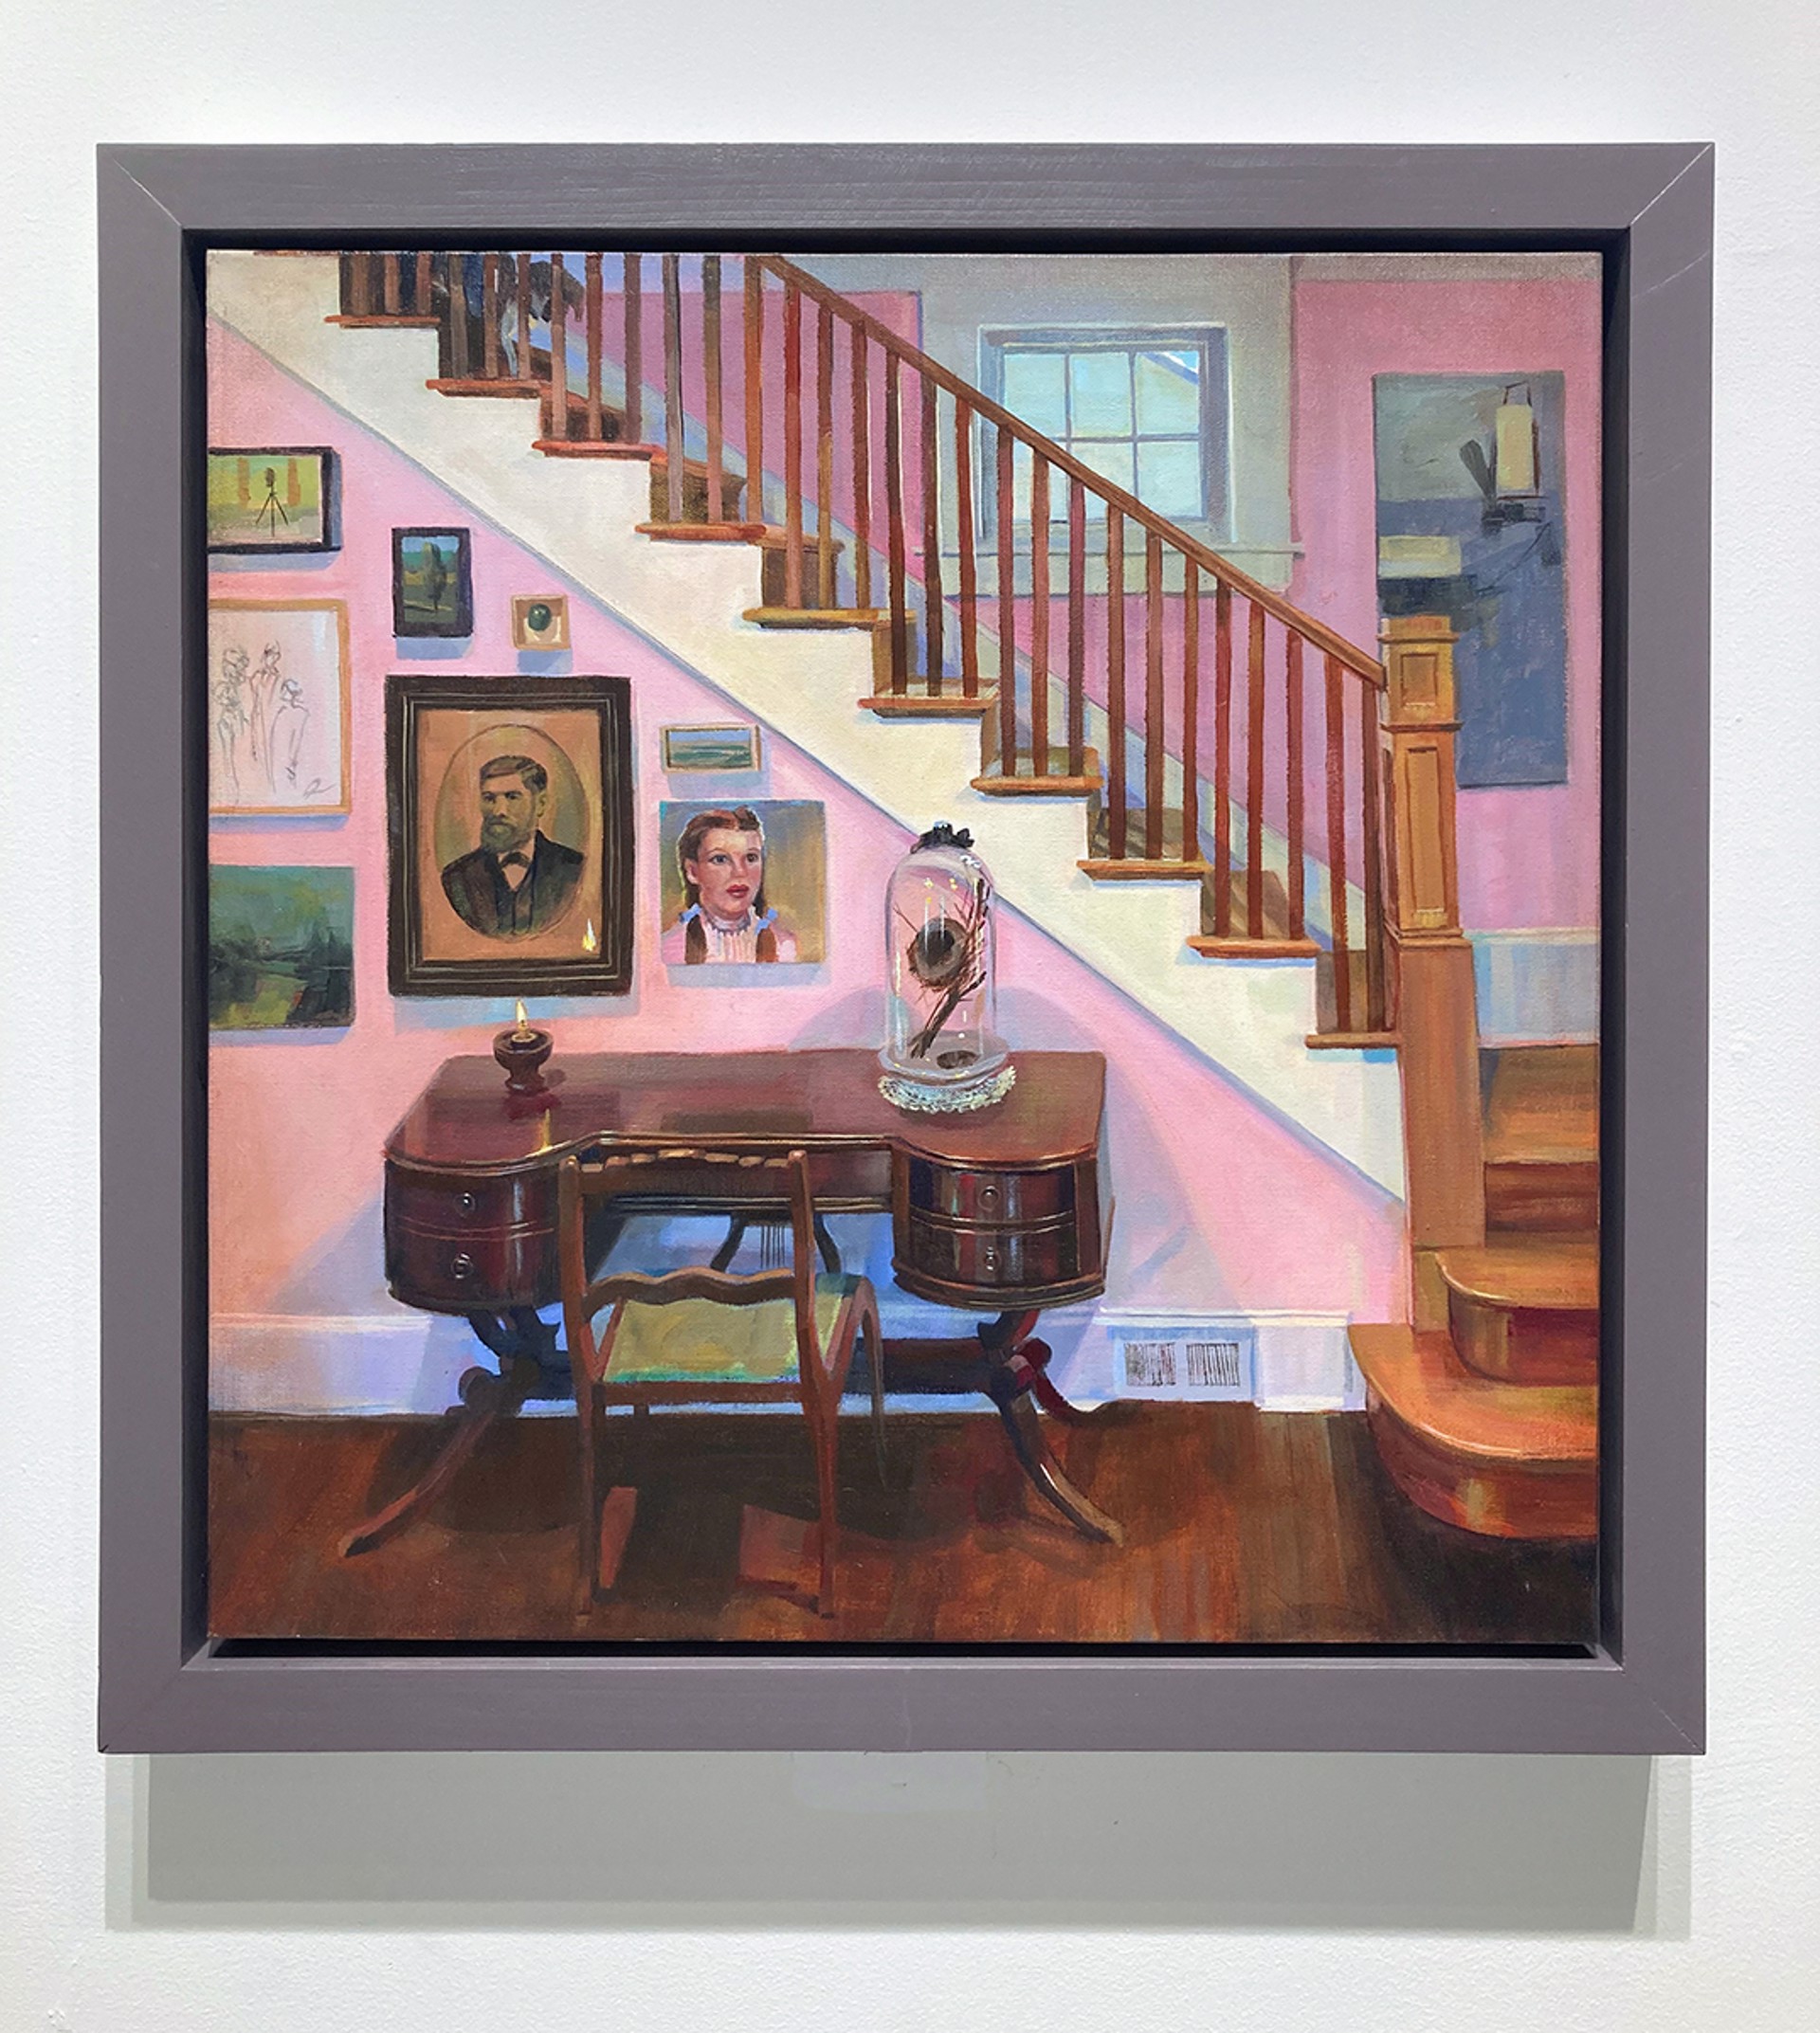 Stairwell by Carl Grauer